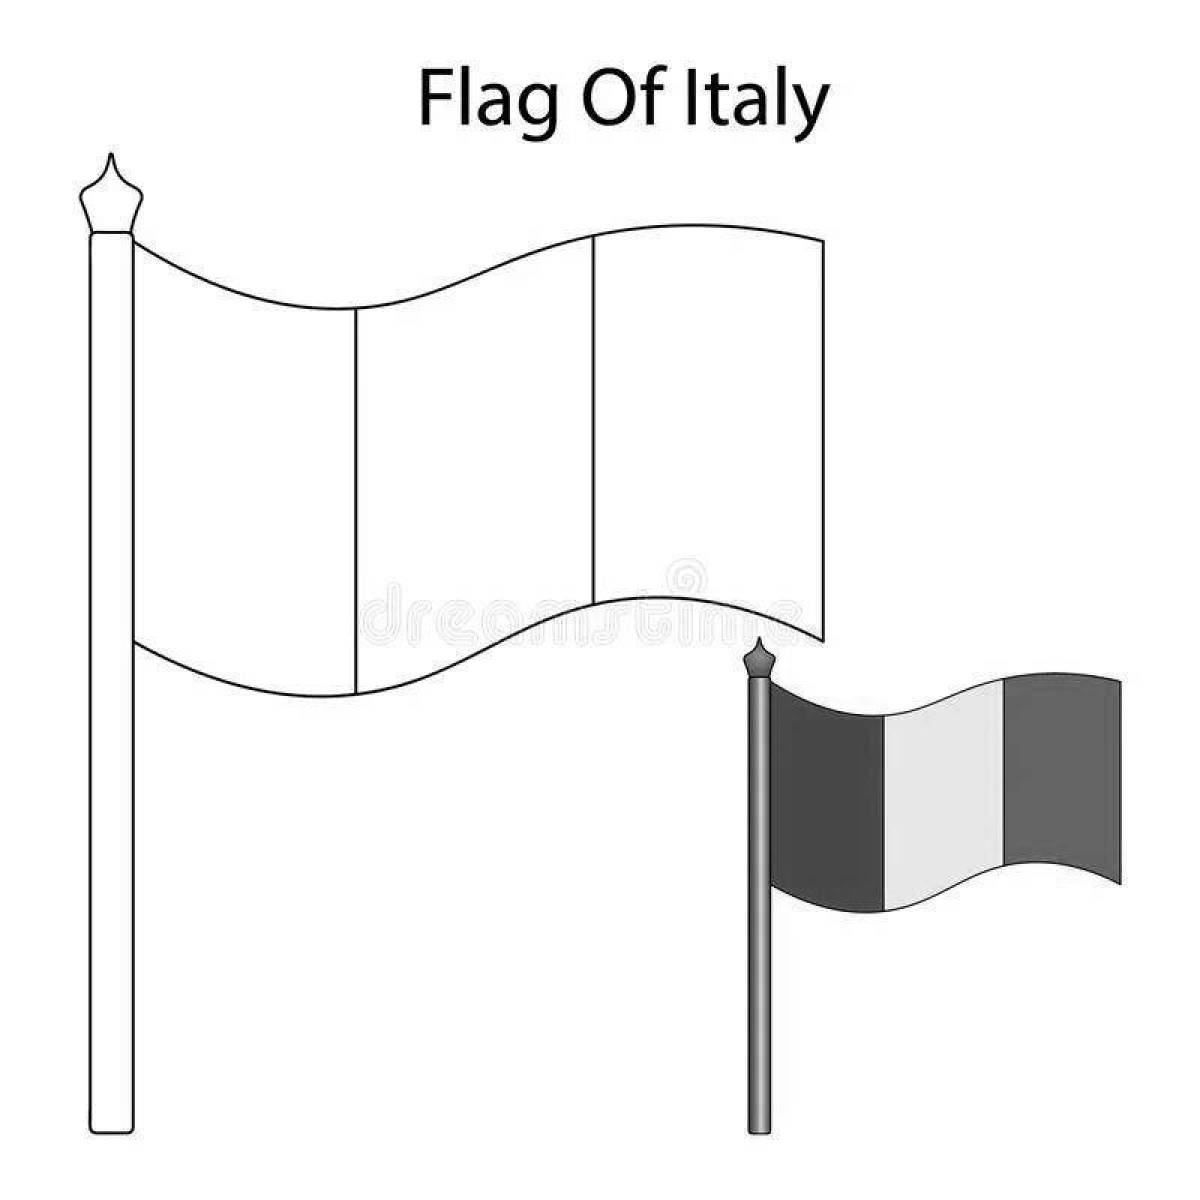 Coloring page of italy flag